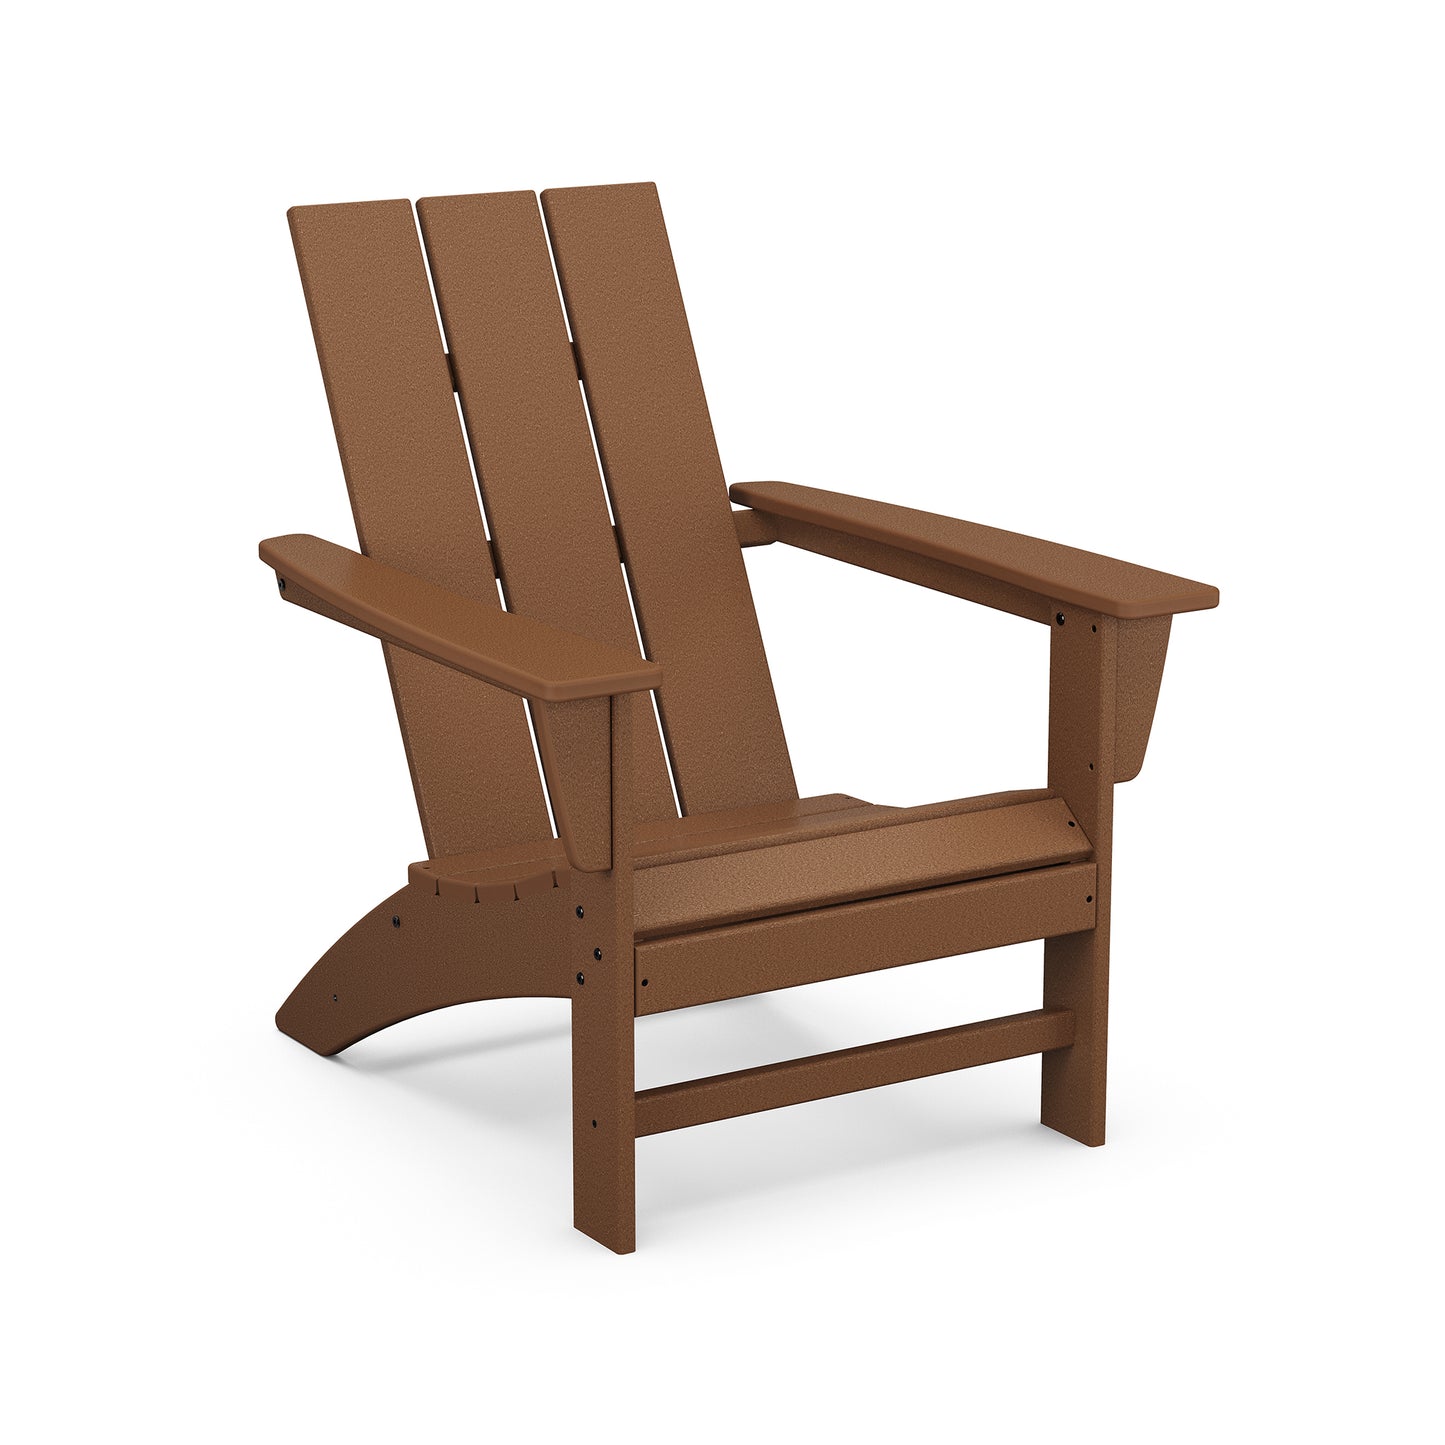 A fade-resistant POLYWOOD Modern Adirondack chair made of plastic, designed for outdoor use, displayed on a white background. The chair has a slanted back and wide armrests, typical of this style.